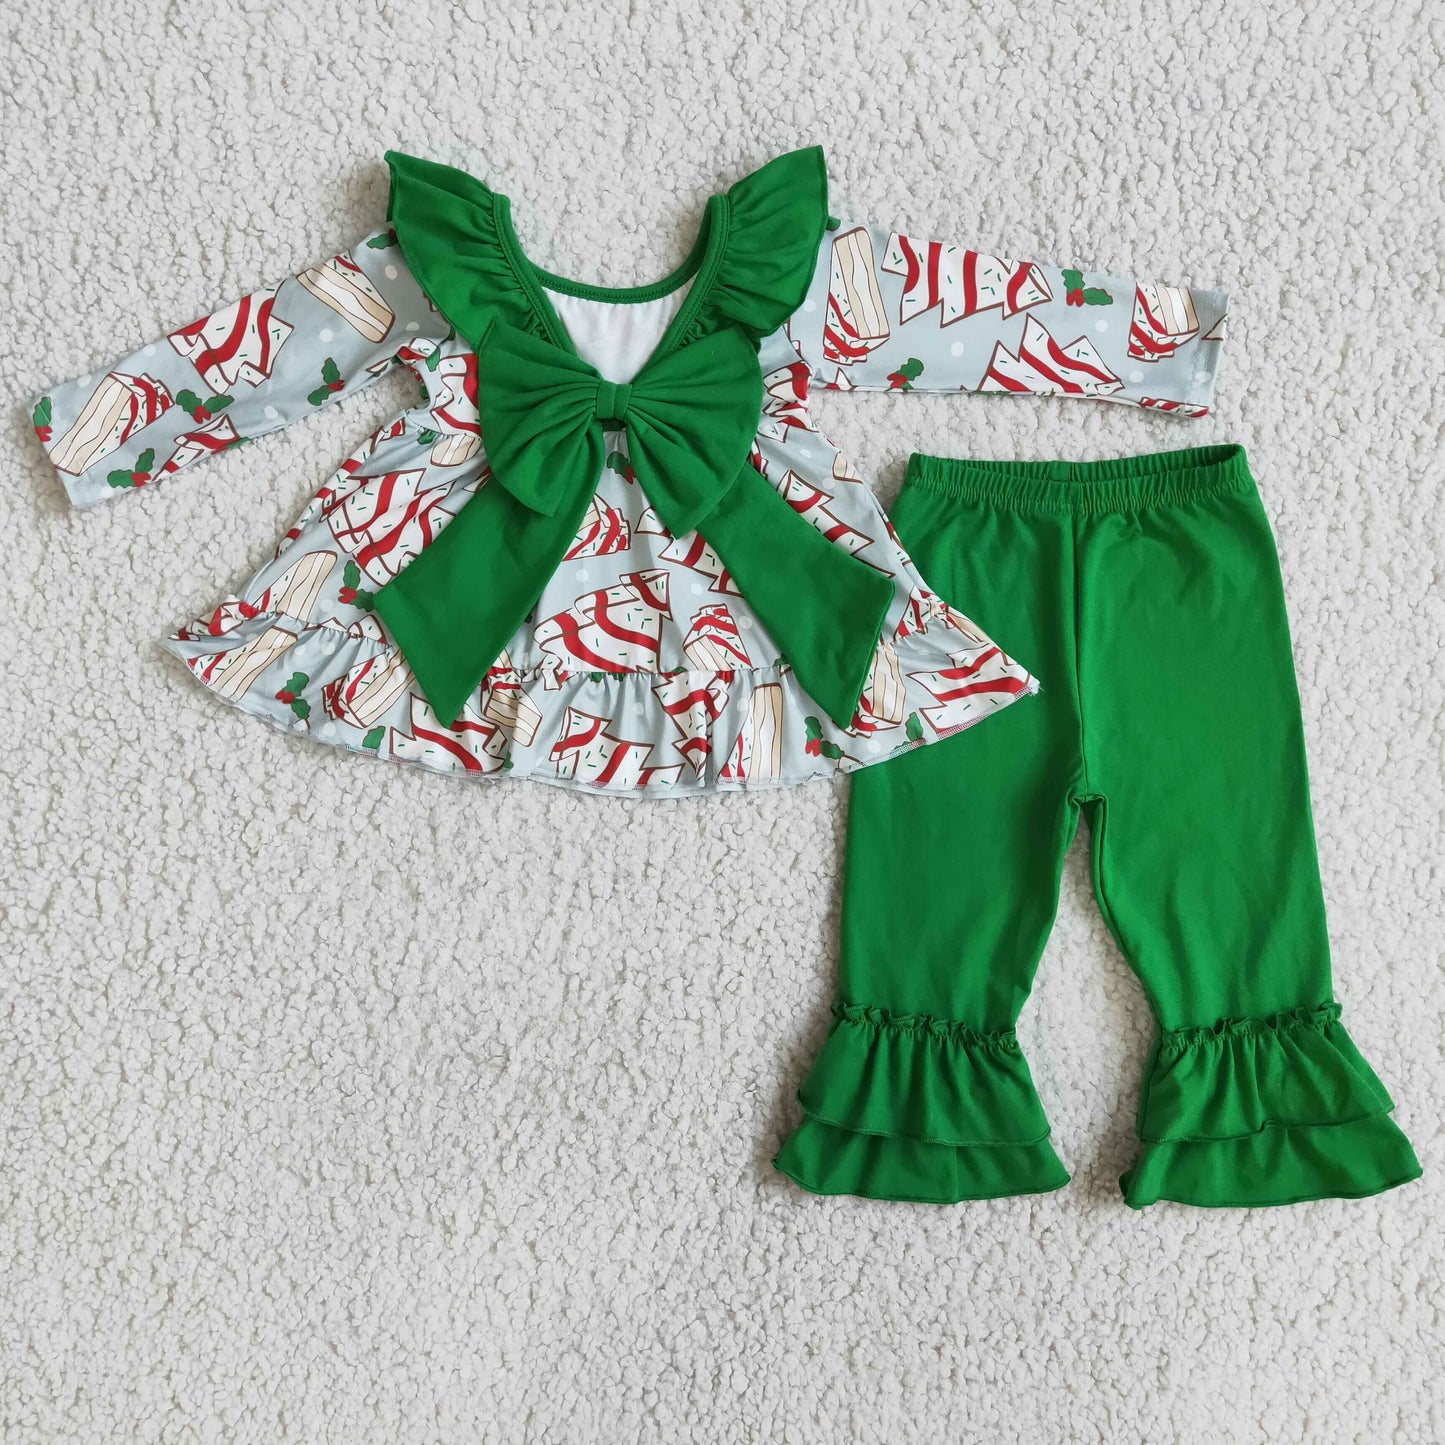 Girls Christmas Outfit With Green Bow on the Back